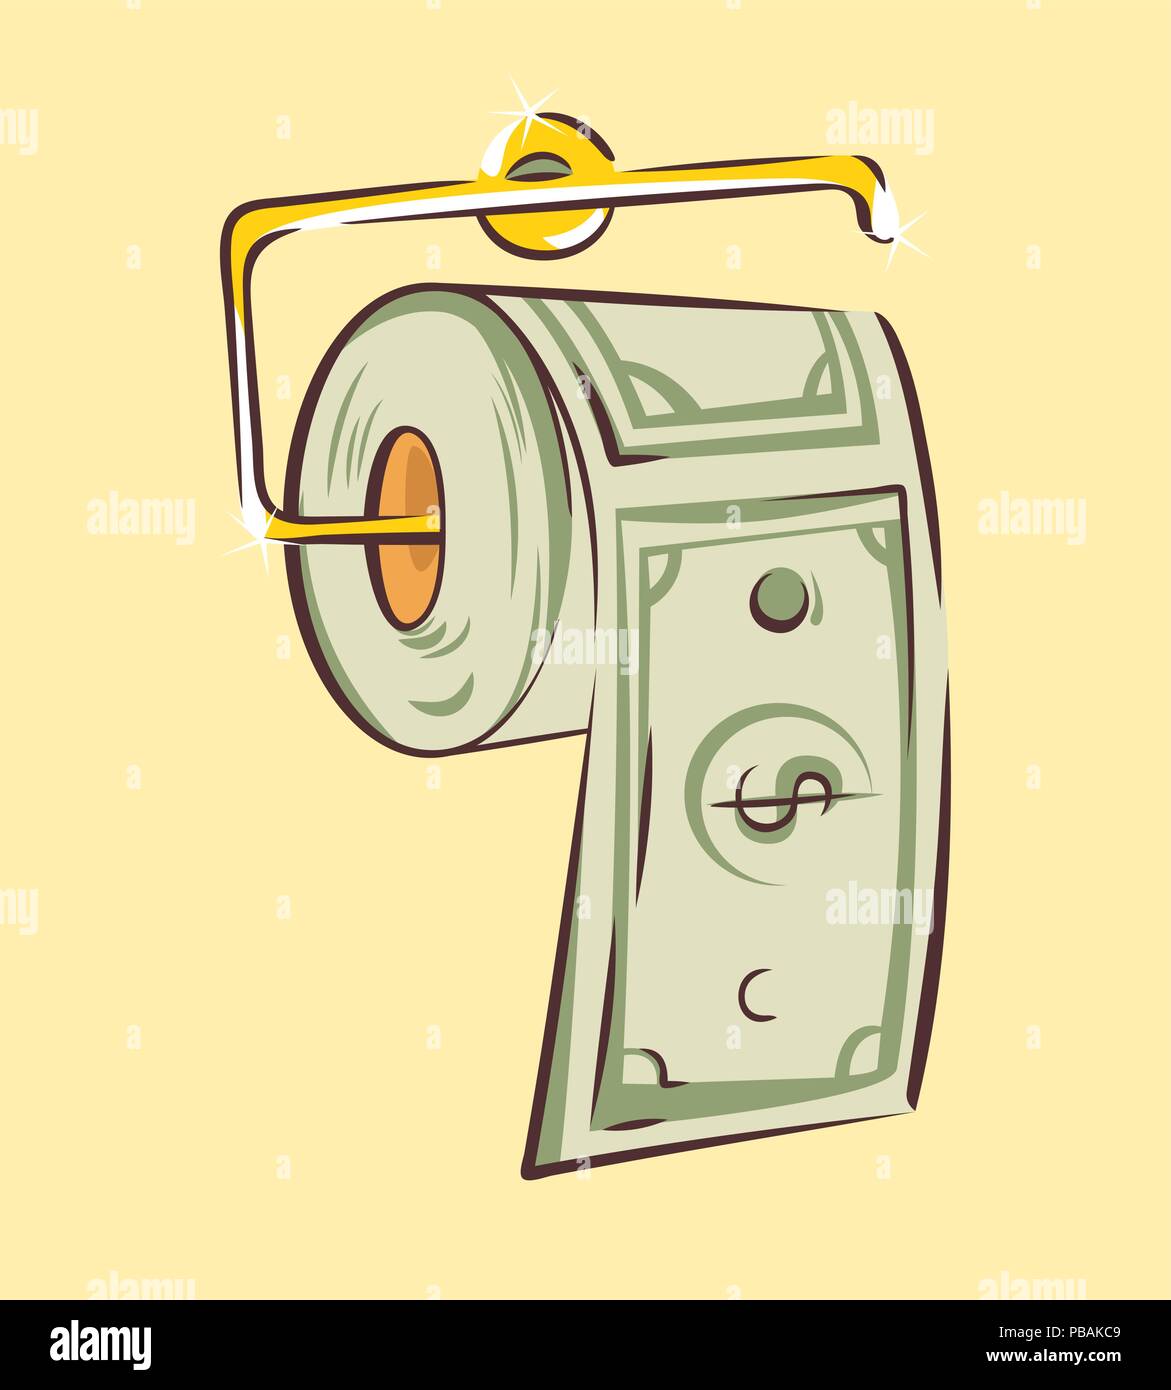 Money as toilet paper, easy cash or crisis concepts, cartoon style vector illustration Stock Vector